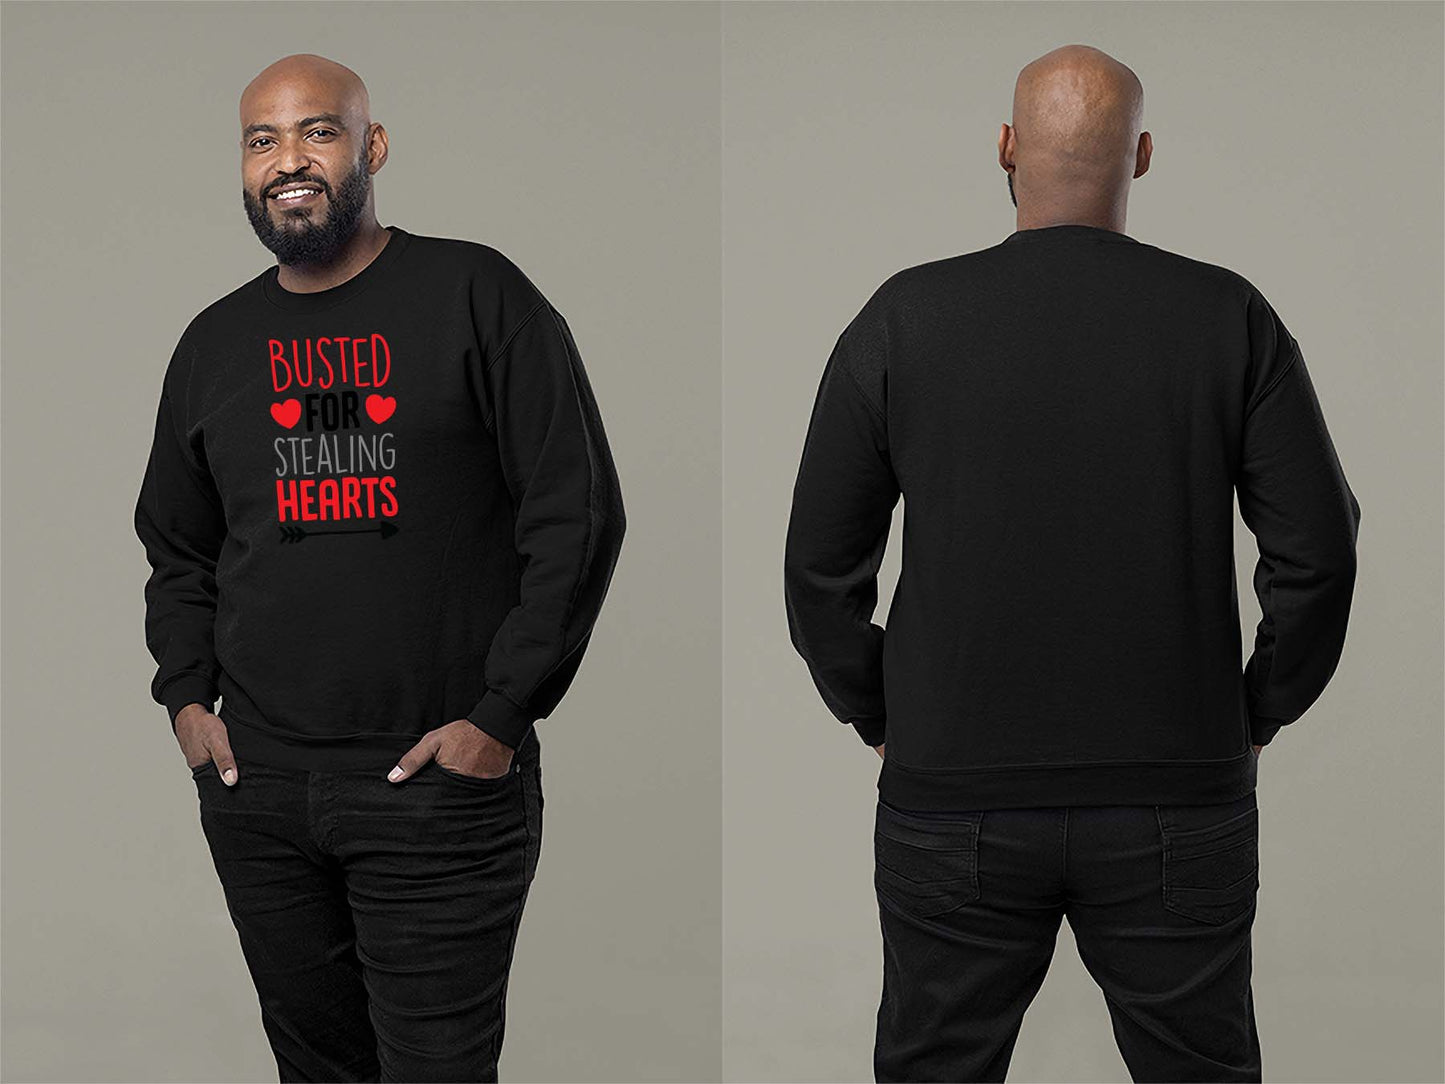 Fat Dave Busted For Stealing Hearts Sweatshirt Small Black